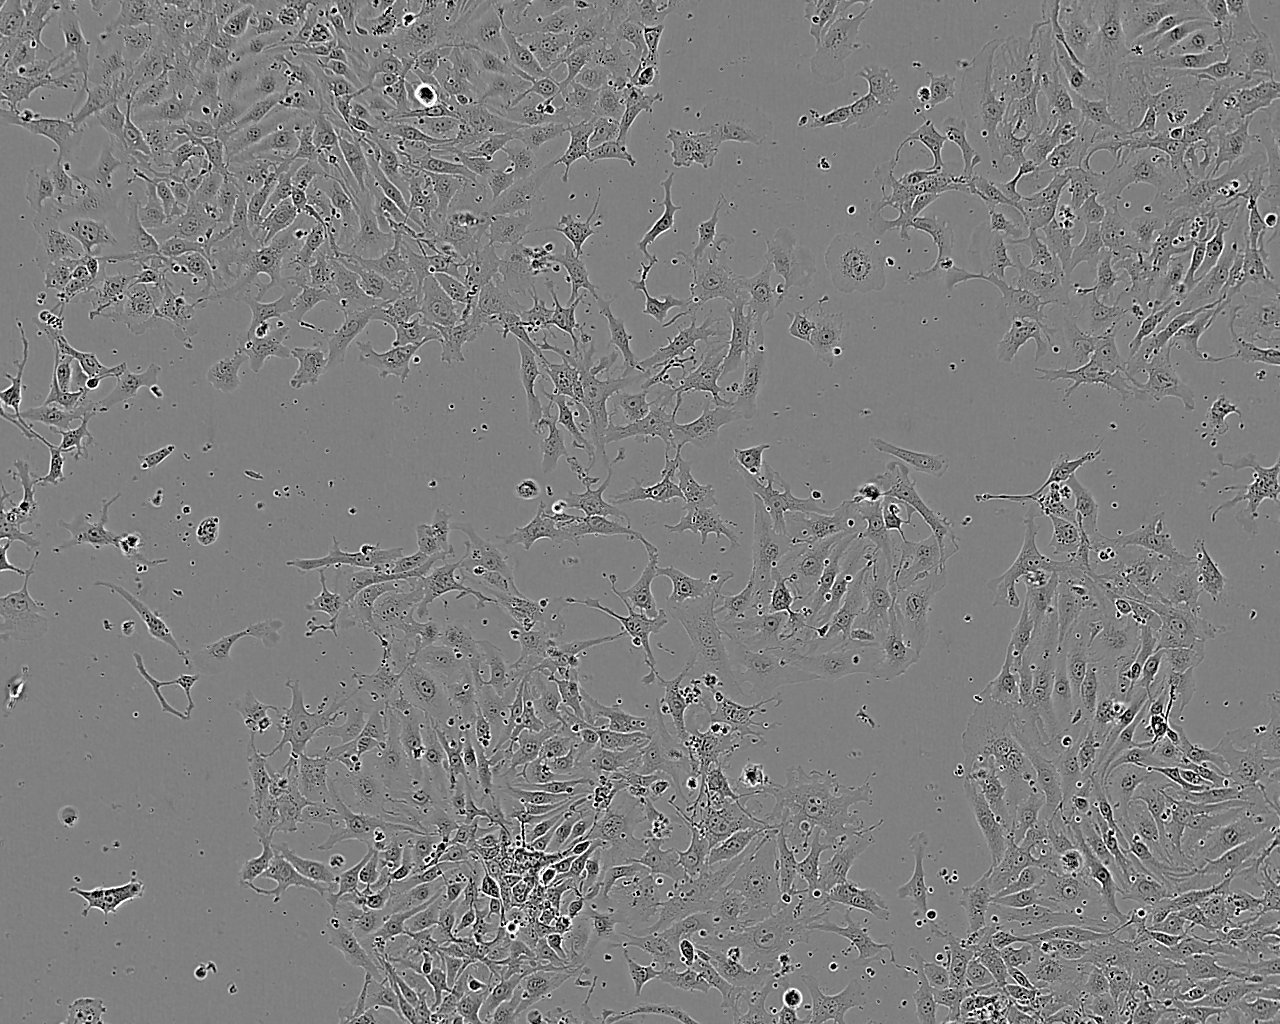 H22-H8D8 epithelioid cells小鼠肝癌细胞系,H22-H8D8 epithelioid cells